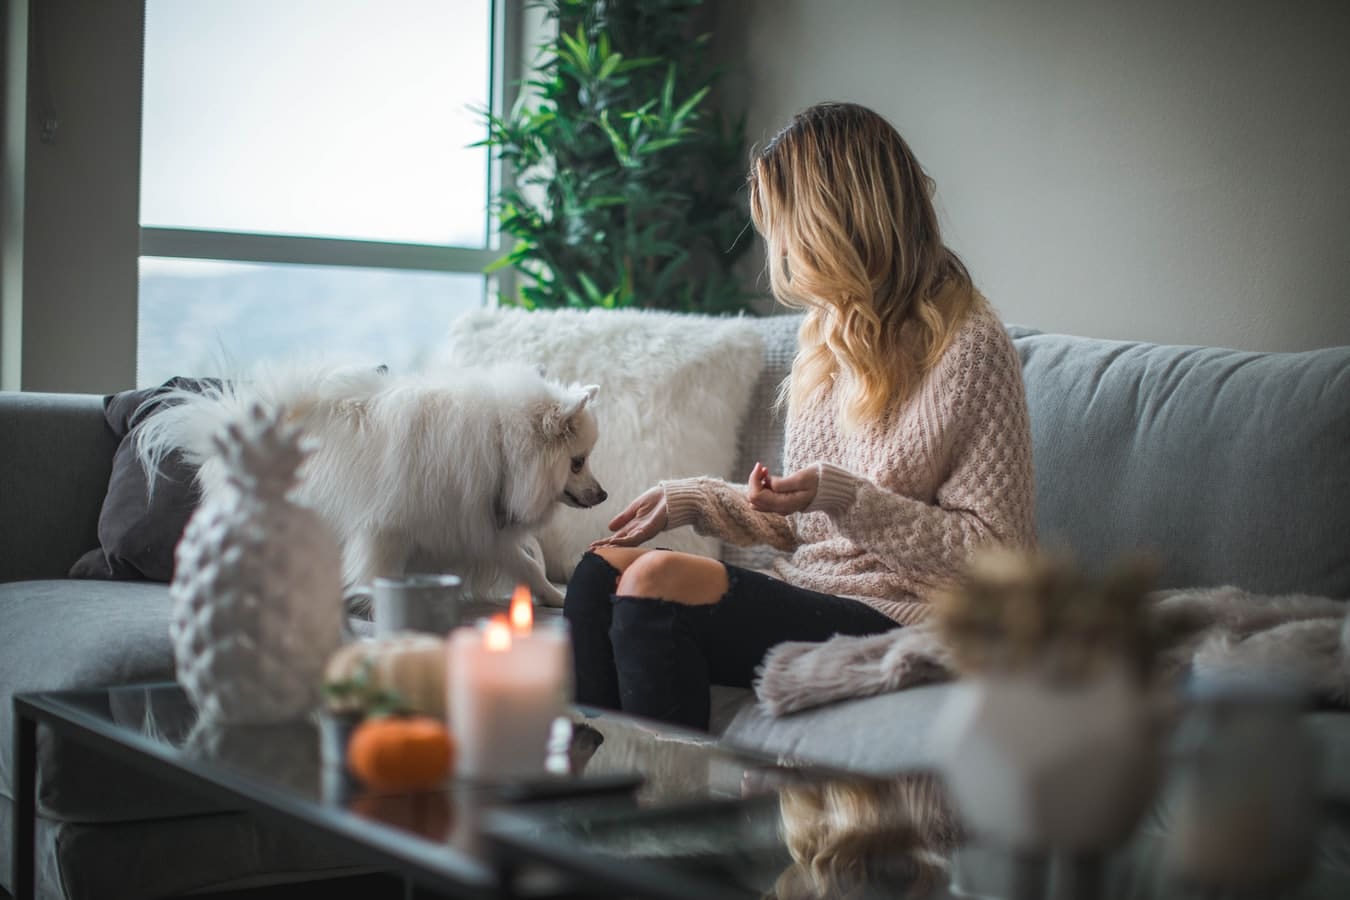 Woman sitting on the couch, interacting with her dog